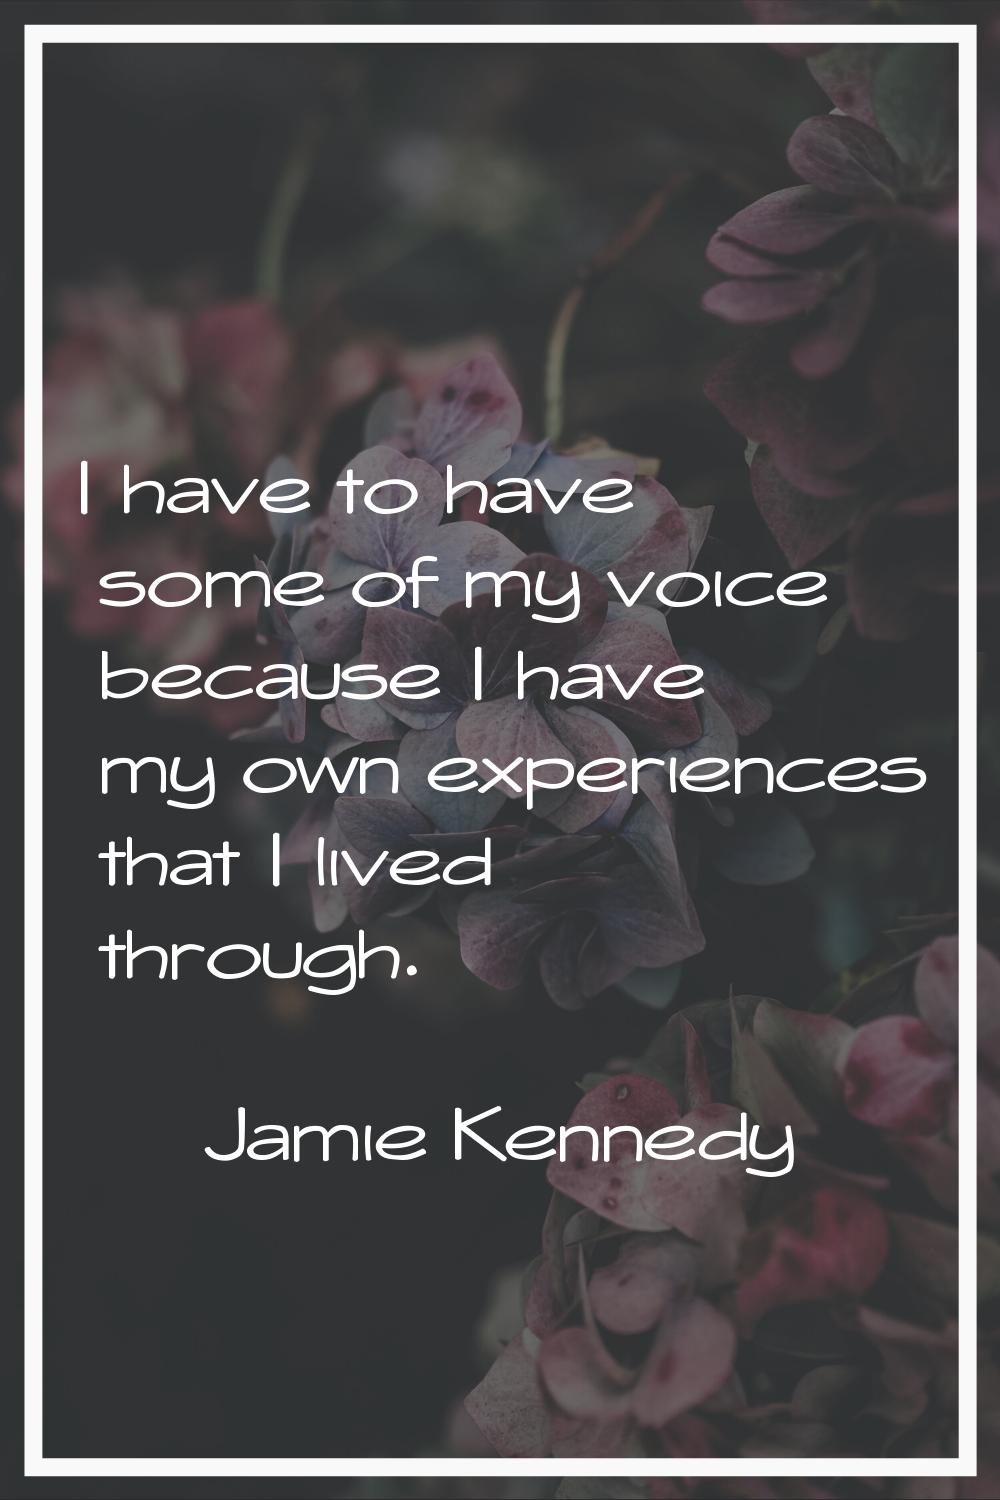 I have to have some of my voice because I have my own experiences that I lived through.